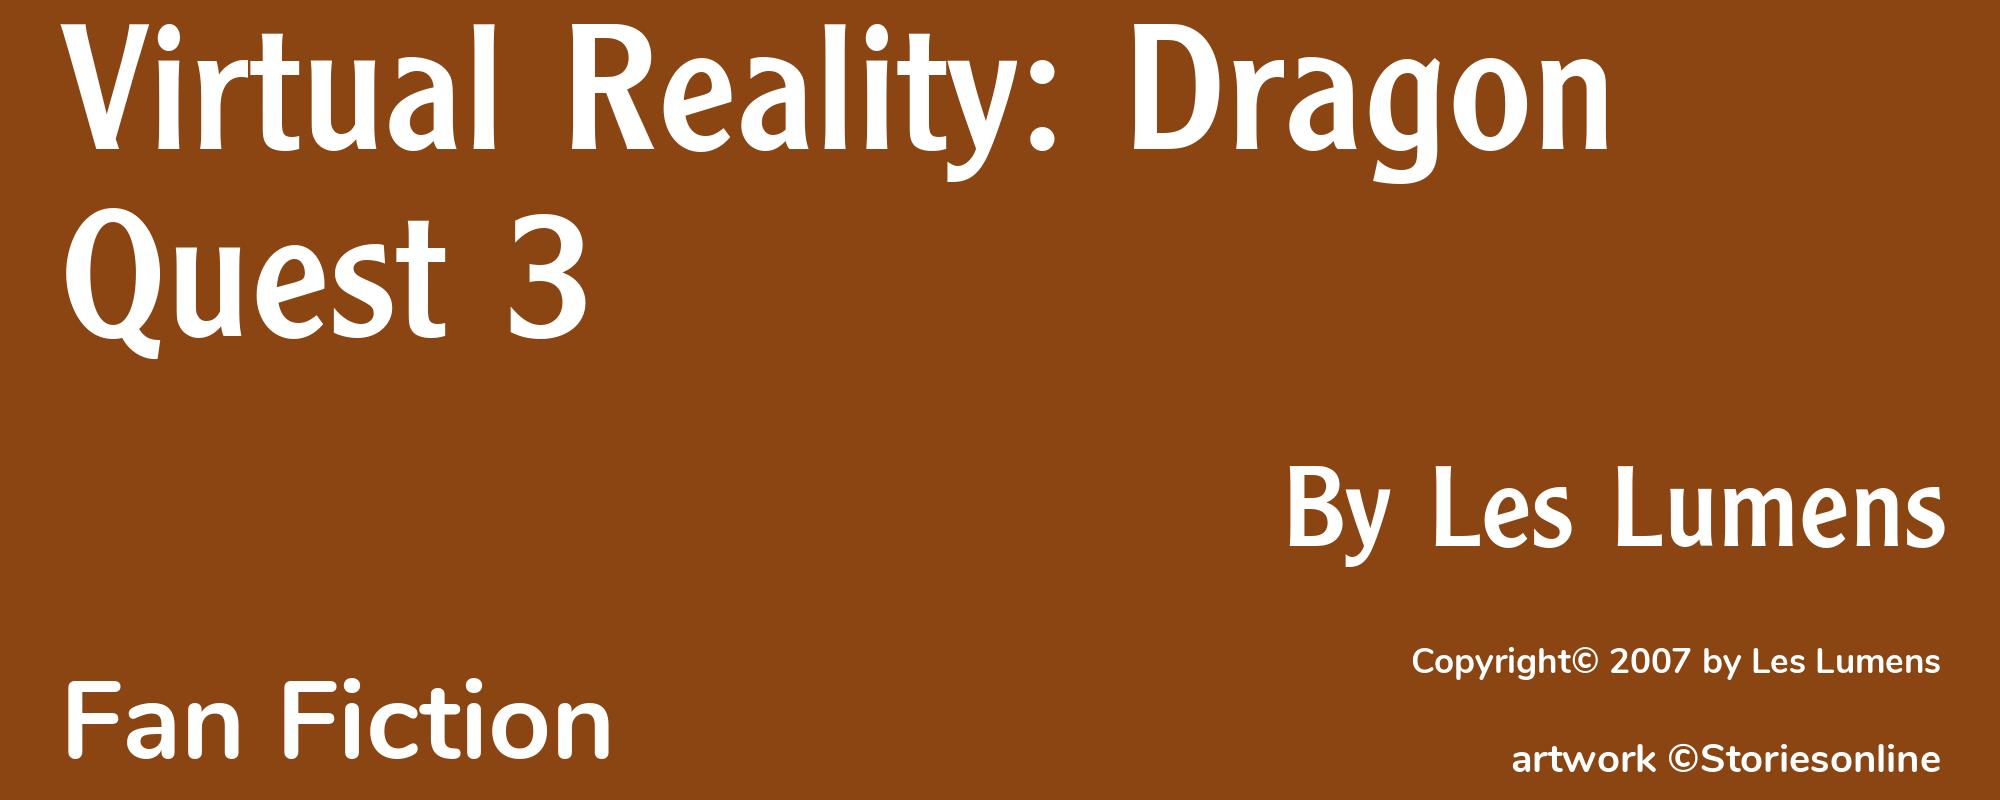 Virtual Reality: Dragon Quest 3 - Cover